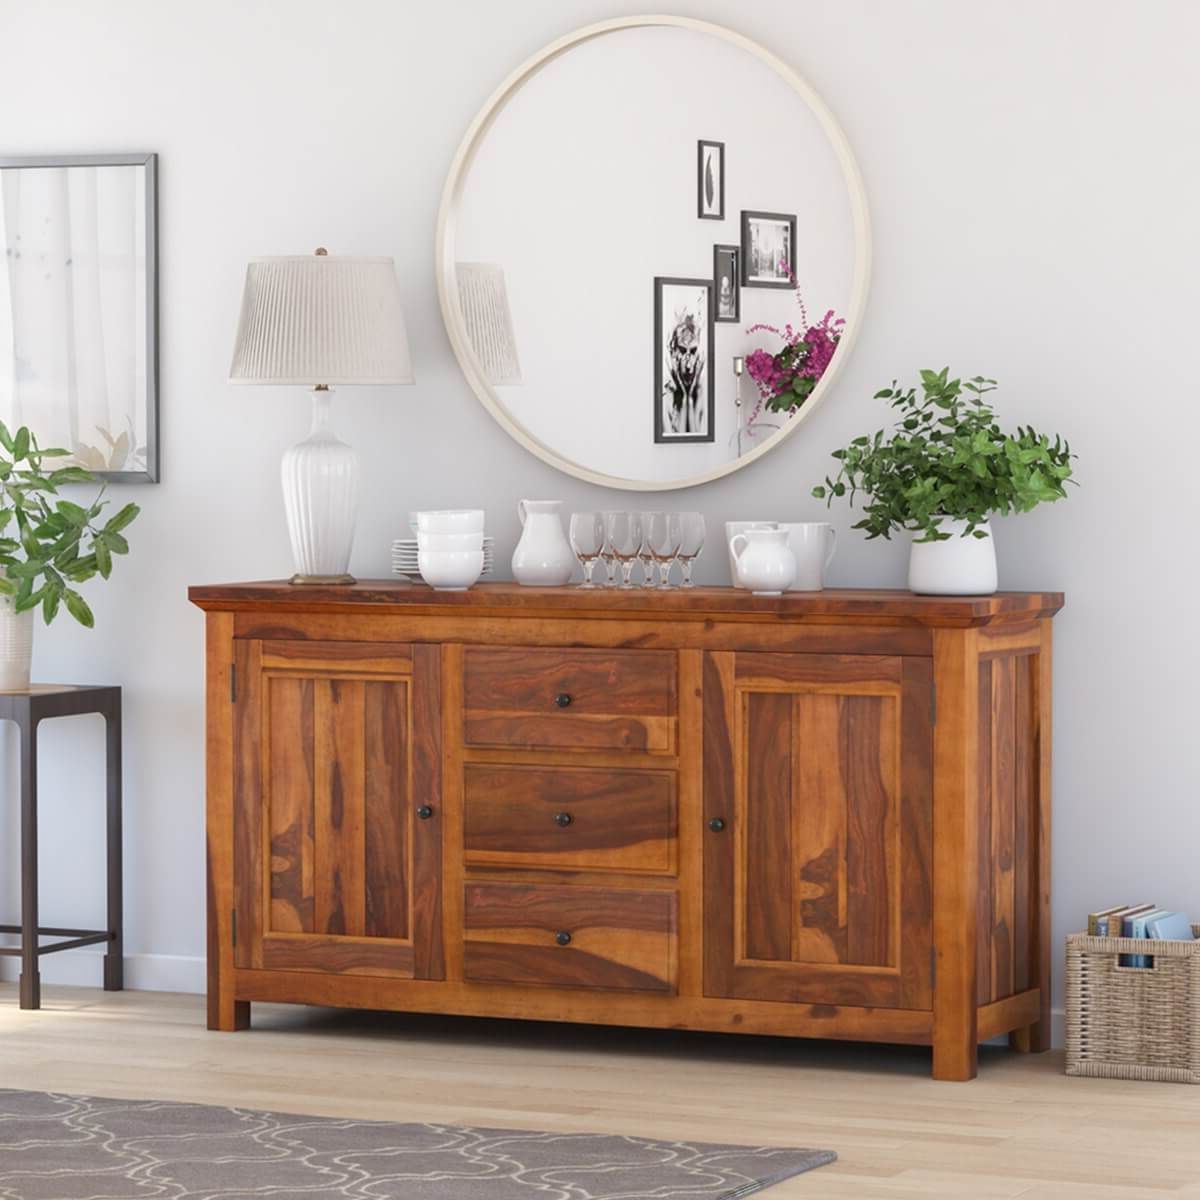 Naperville Rustic Solid Wood 3 Drawer Large Sideboard Cabinet Throughout Sideboards With 3 Drawers (View 10 of 20)